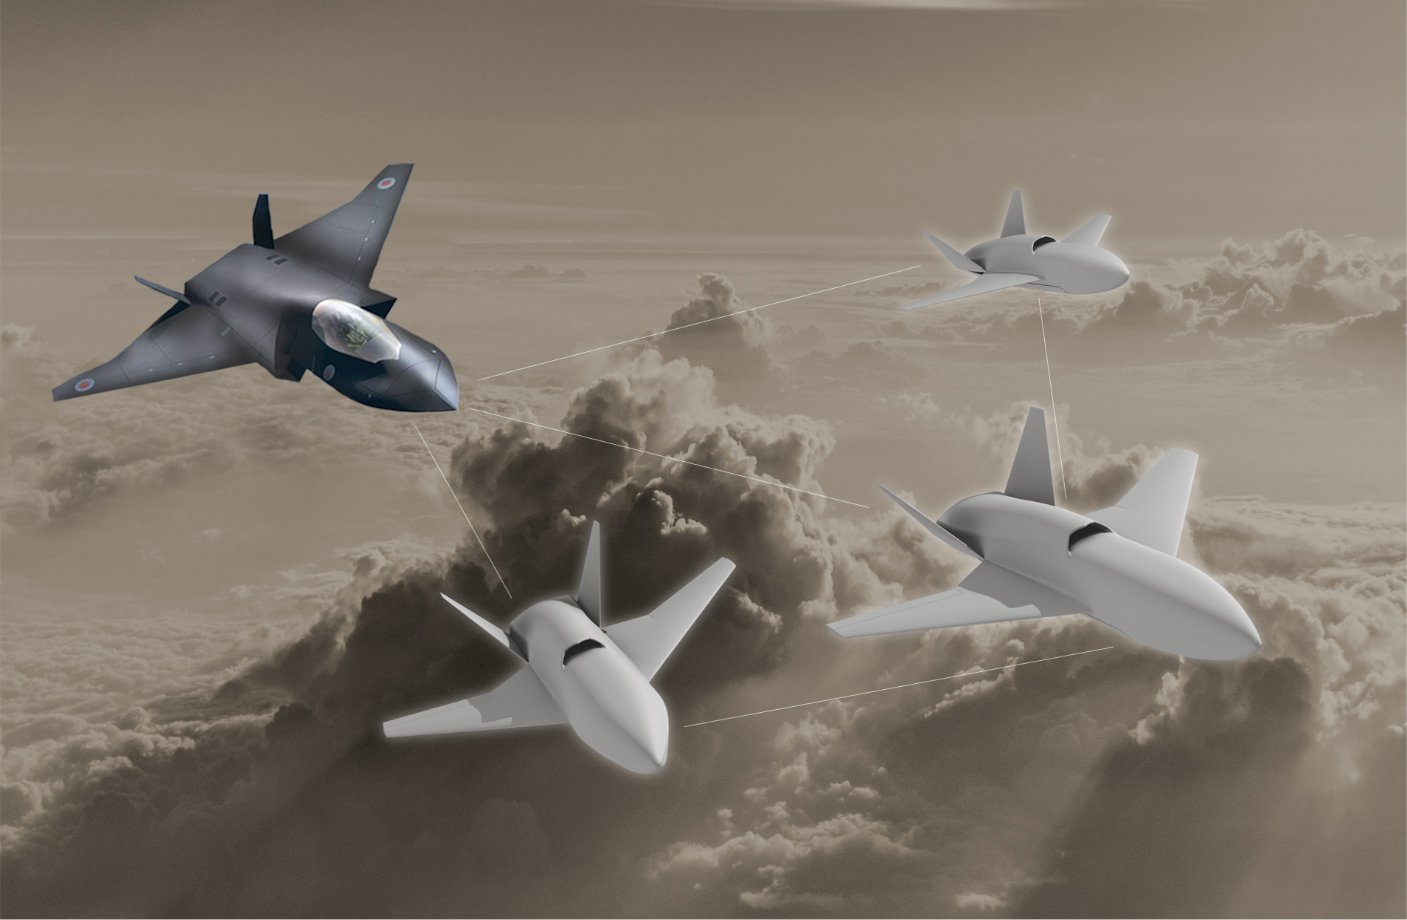 The NCC and the Dstl in the UK have partnered to launch a competition to improve composite combat aircraft structures.